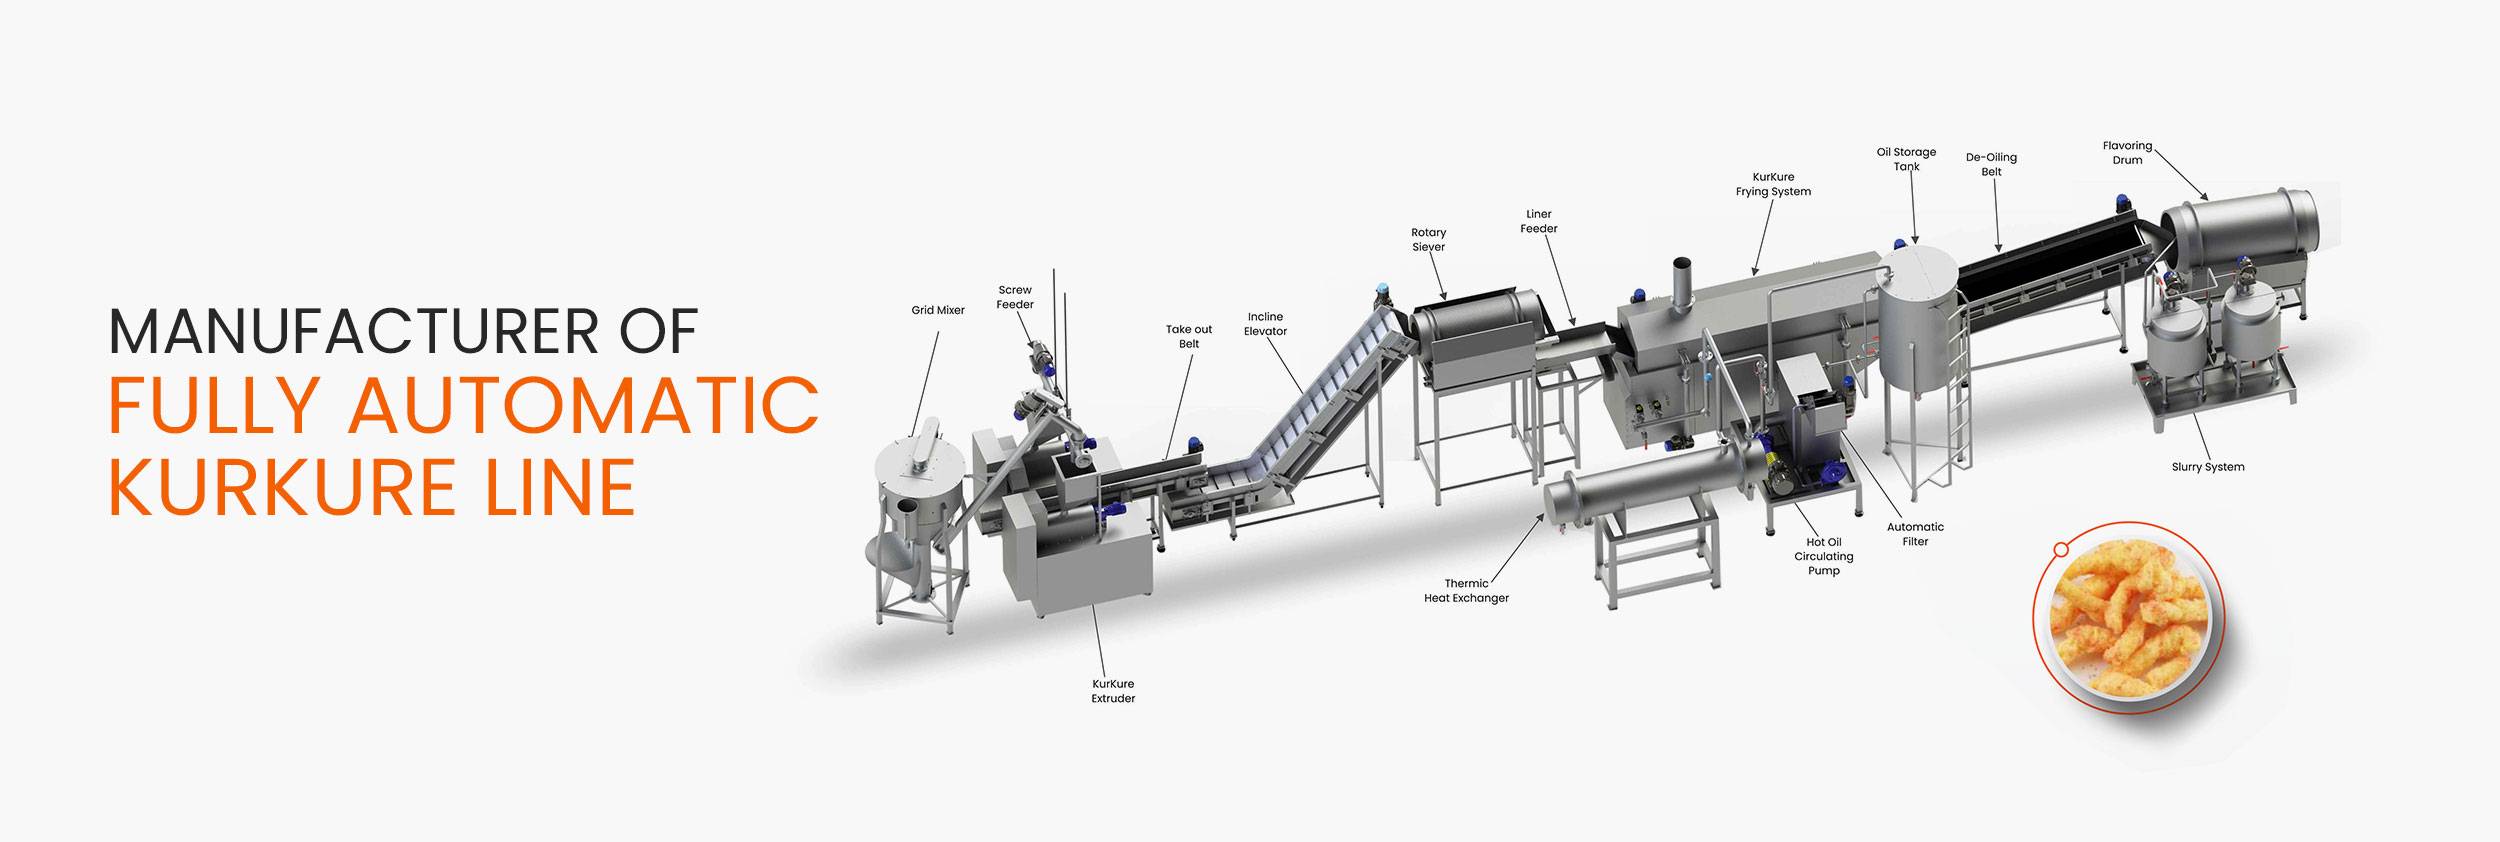 Fry And Bake Technologies Pvt. Ltd.- fully automatic kurkure frying line